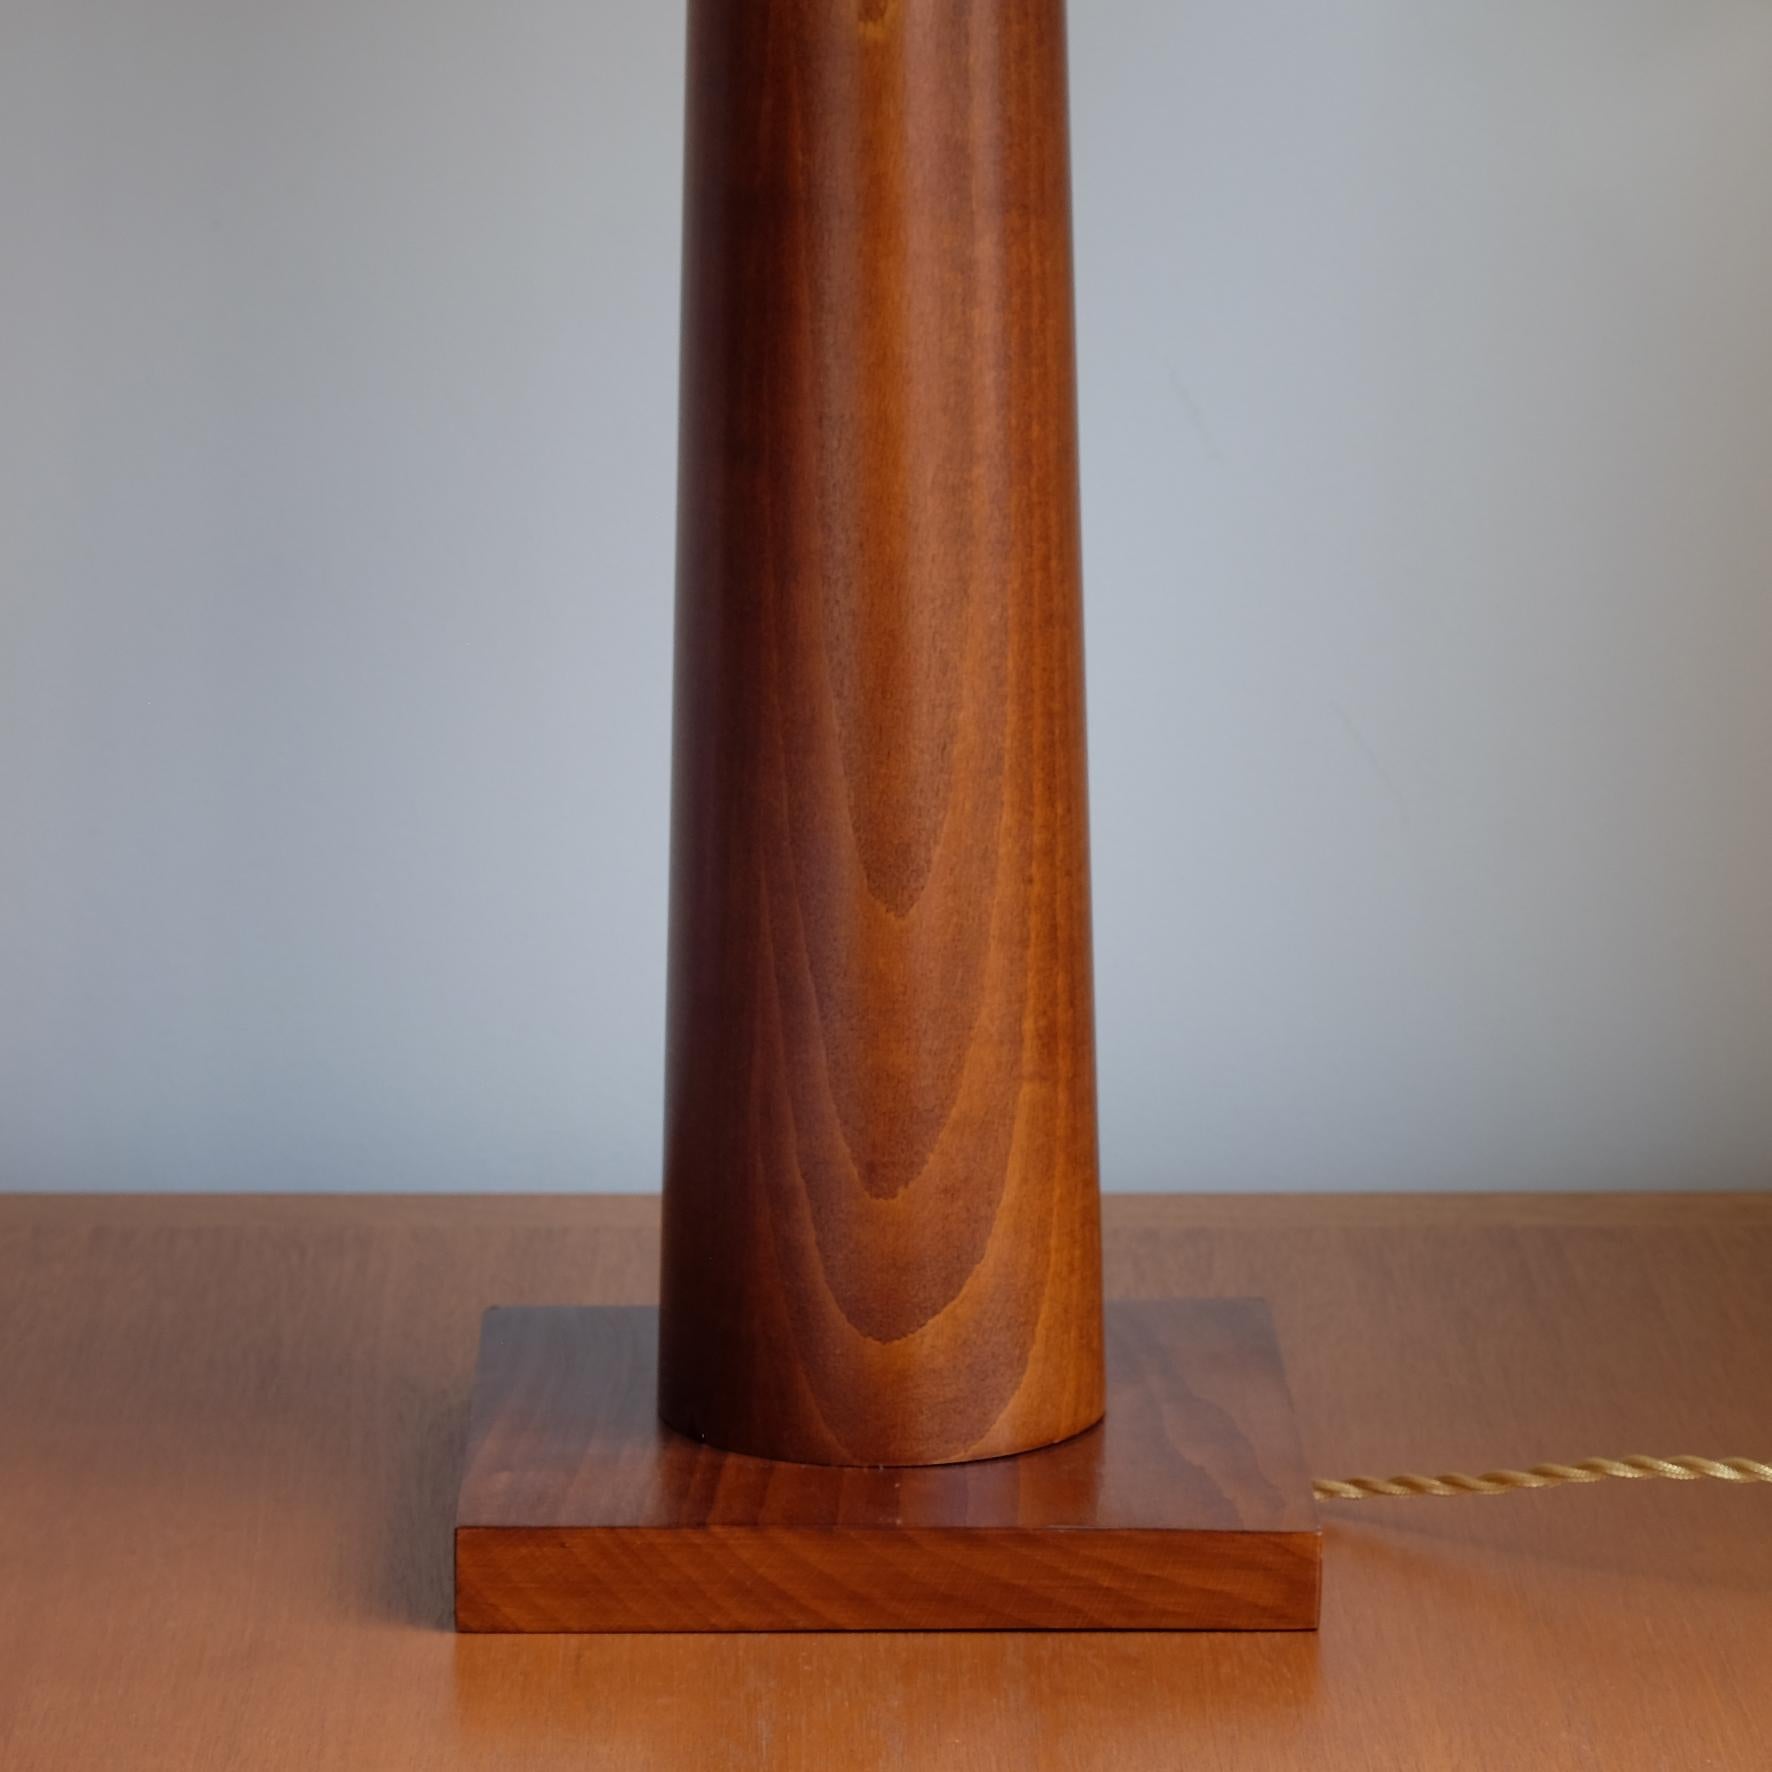 Varnished Doric Column Table Lamp, Art DecoStyle, 21st Century For Sale